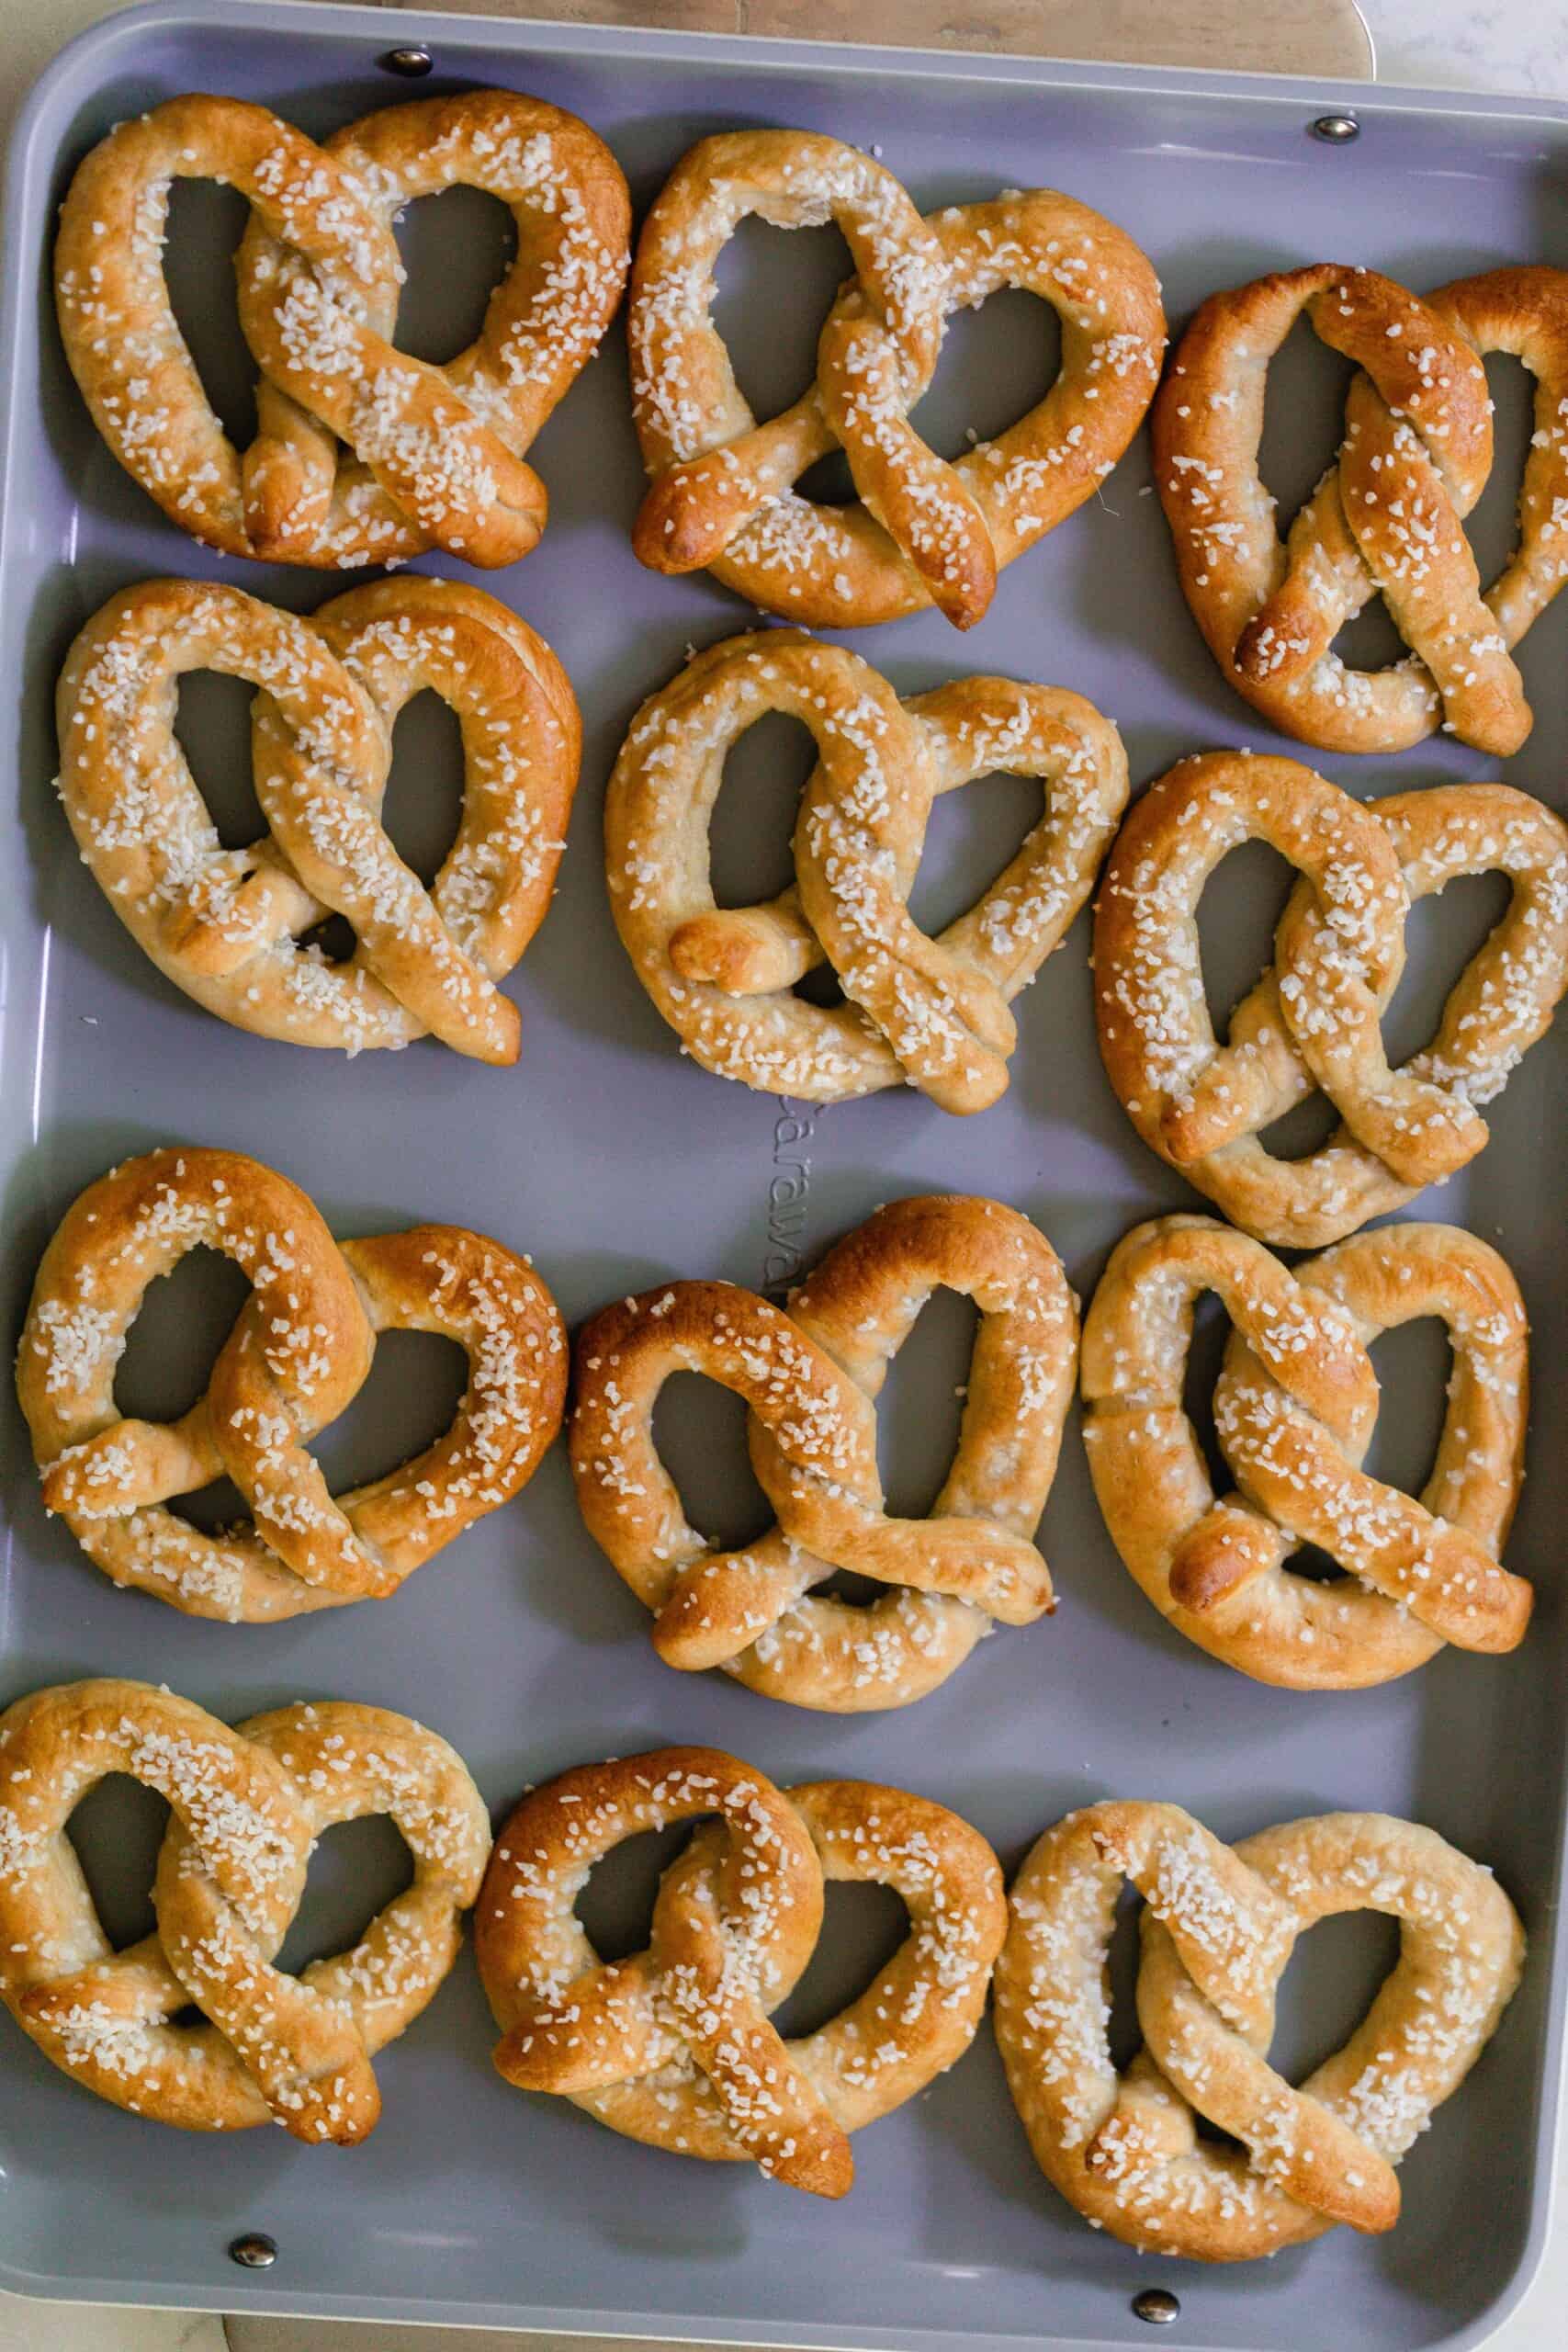 Baking sheet with freshly baking homemade sourdough pretzels topped with coarse salt